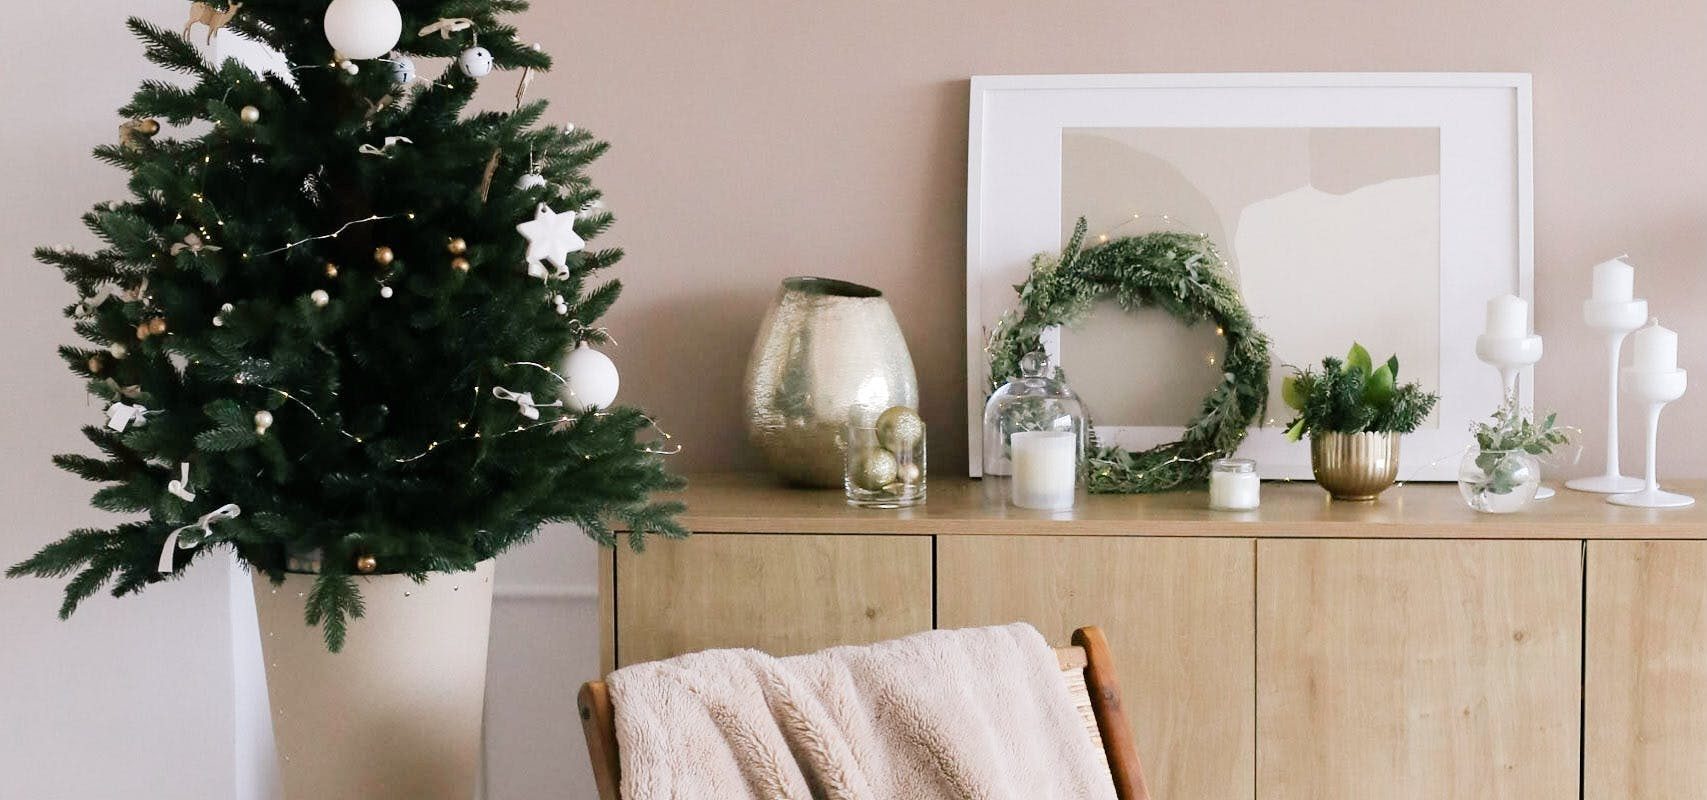 Minimalist Christmas décor ideas you need to try!